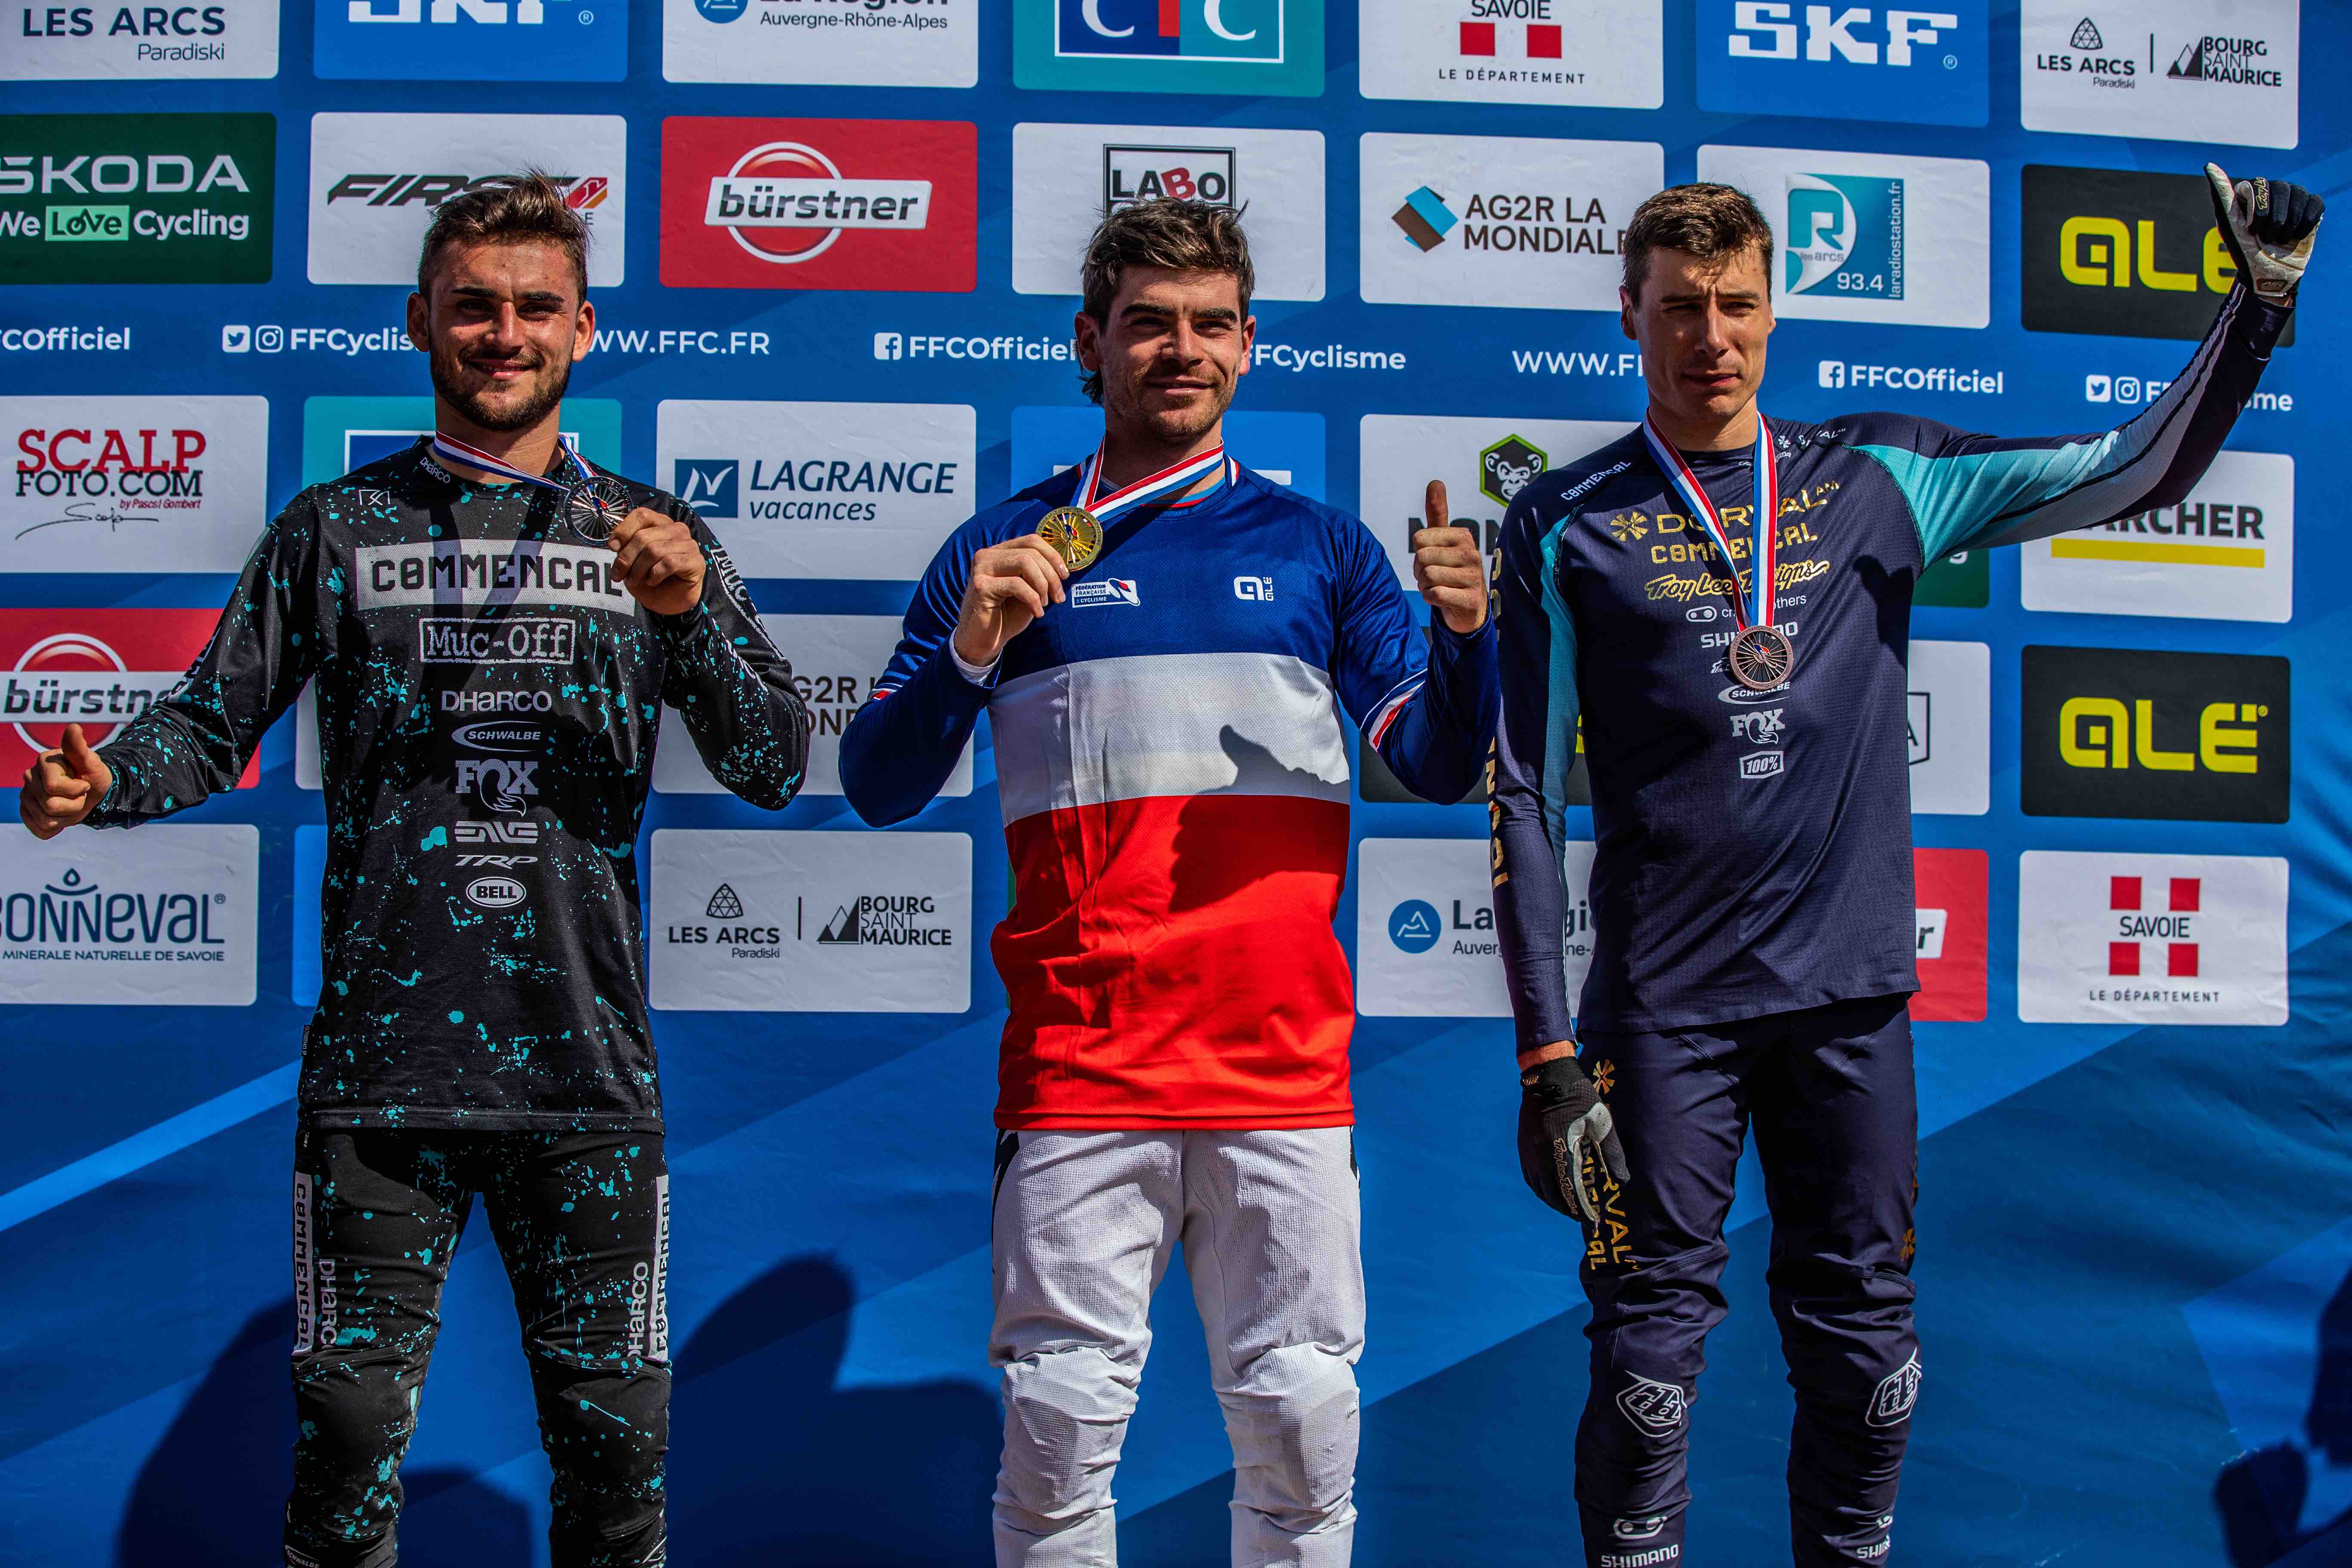 Monster Energy's Thibaut Daprela Takes Silver at the French National Championships of Downhill Mountain Bike Racing at Les Arcs, France